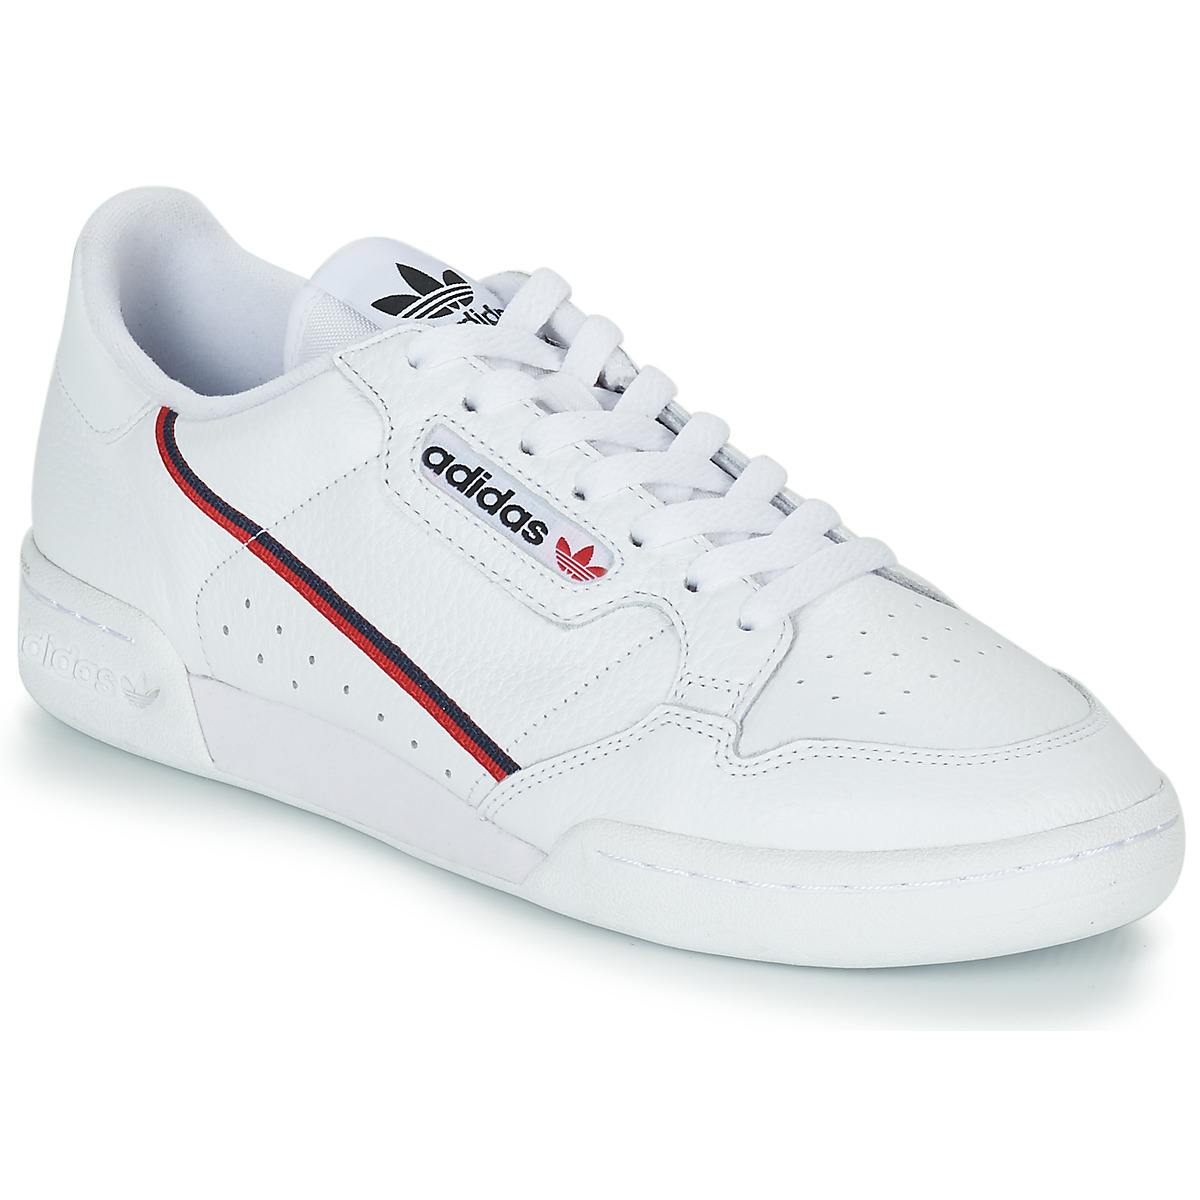 adidas continental 80 limited